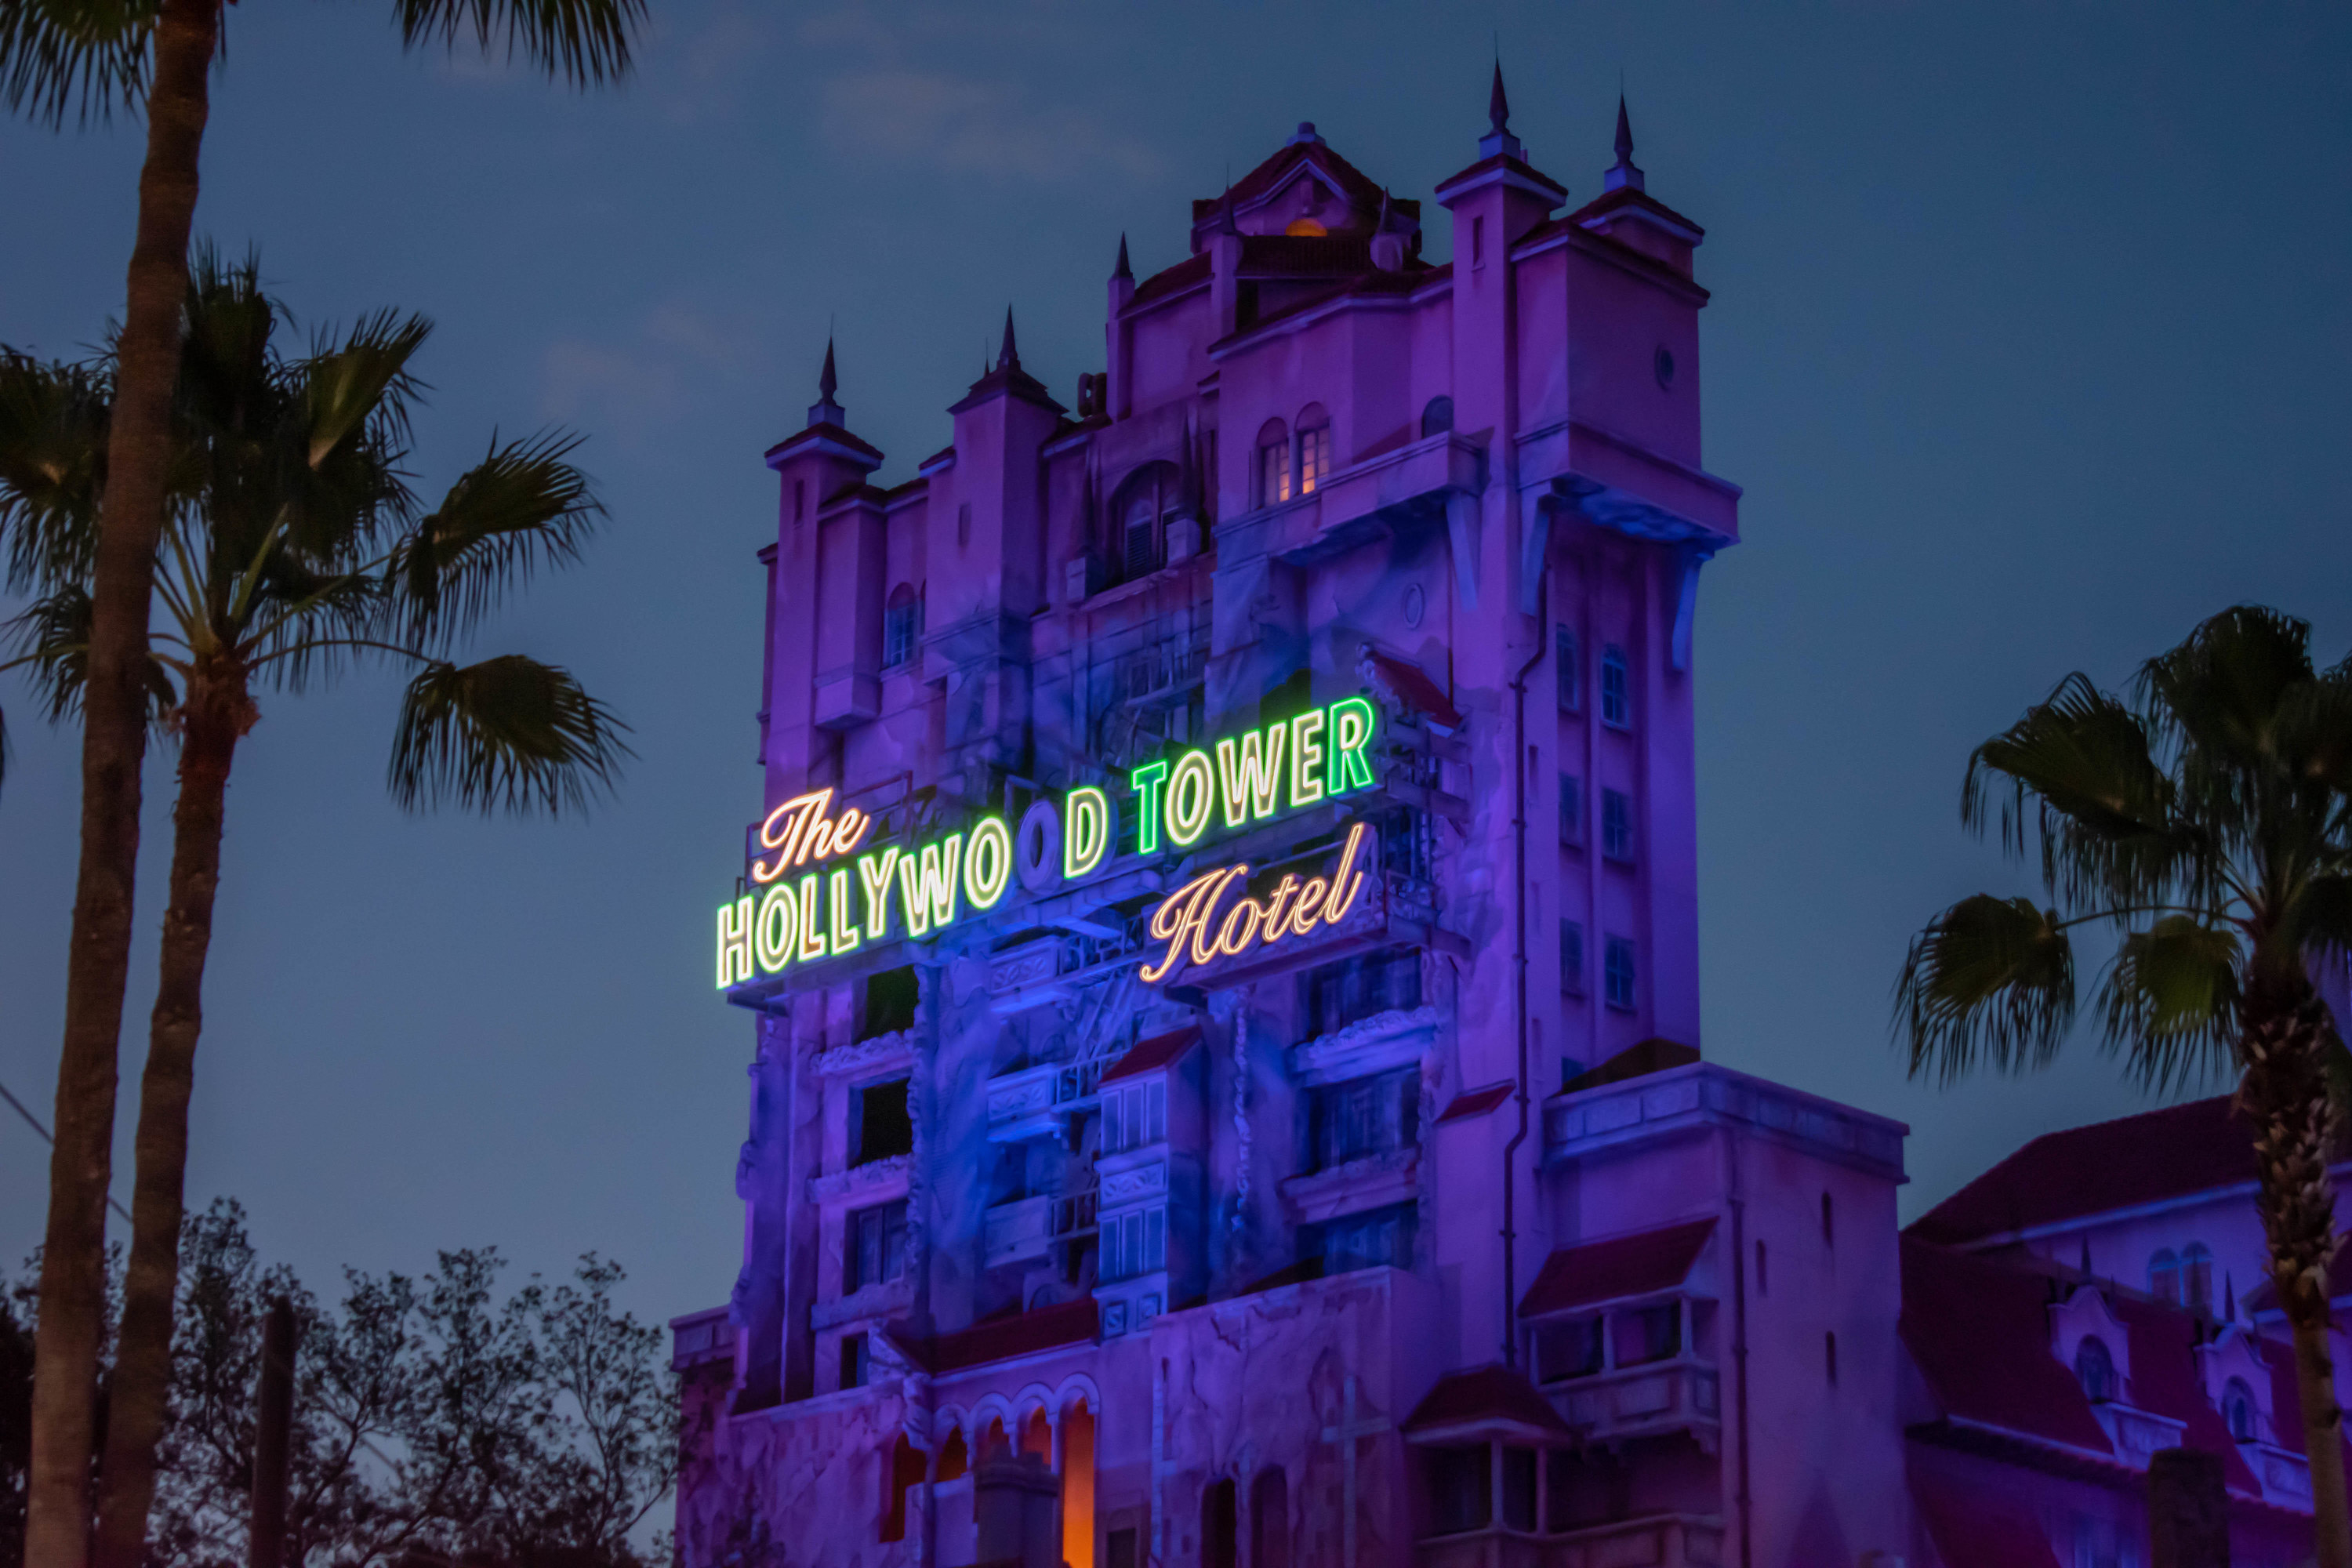 The Twilight Zone Tower of Terror Ride at Disney Hollywood Studios lights up for its late night overlay